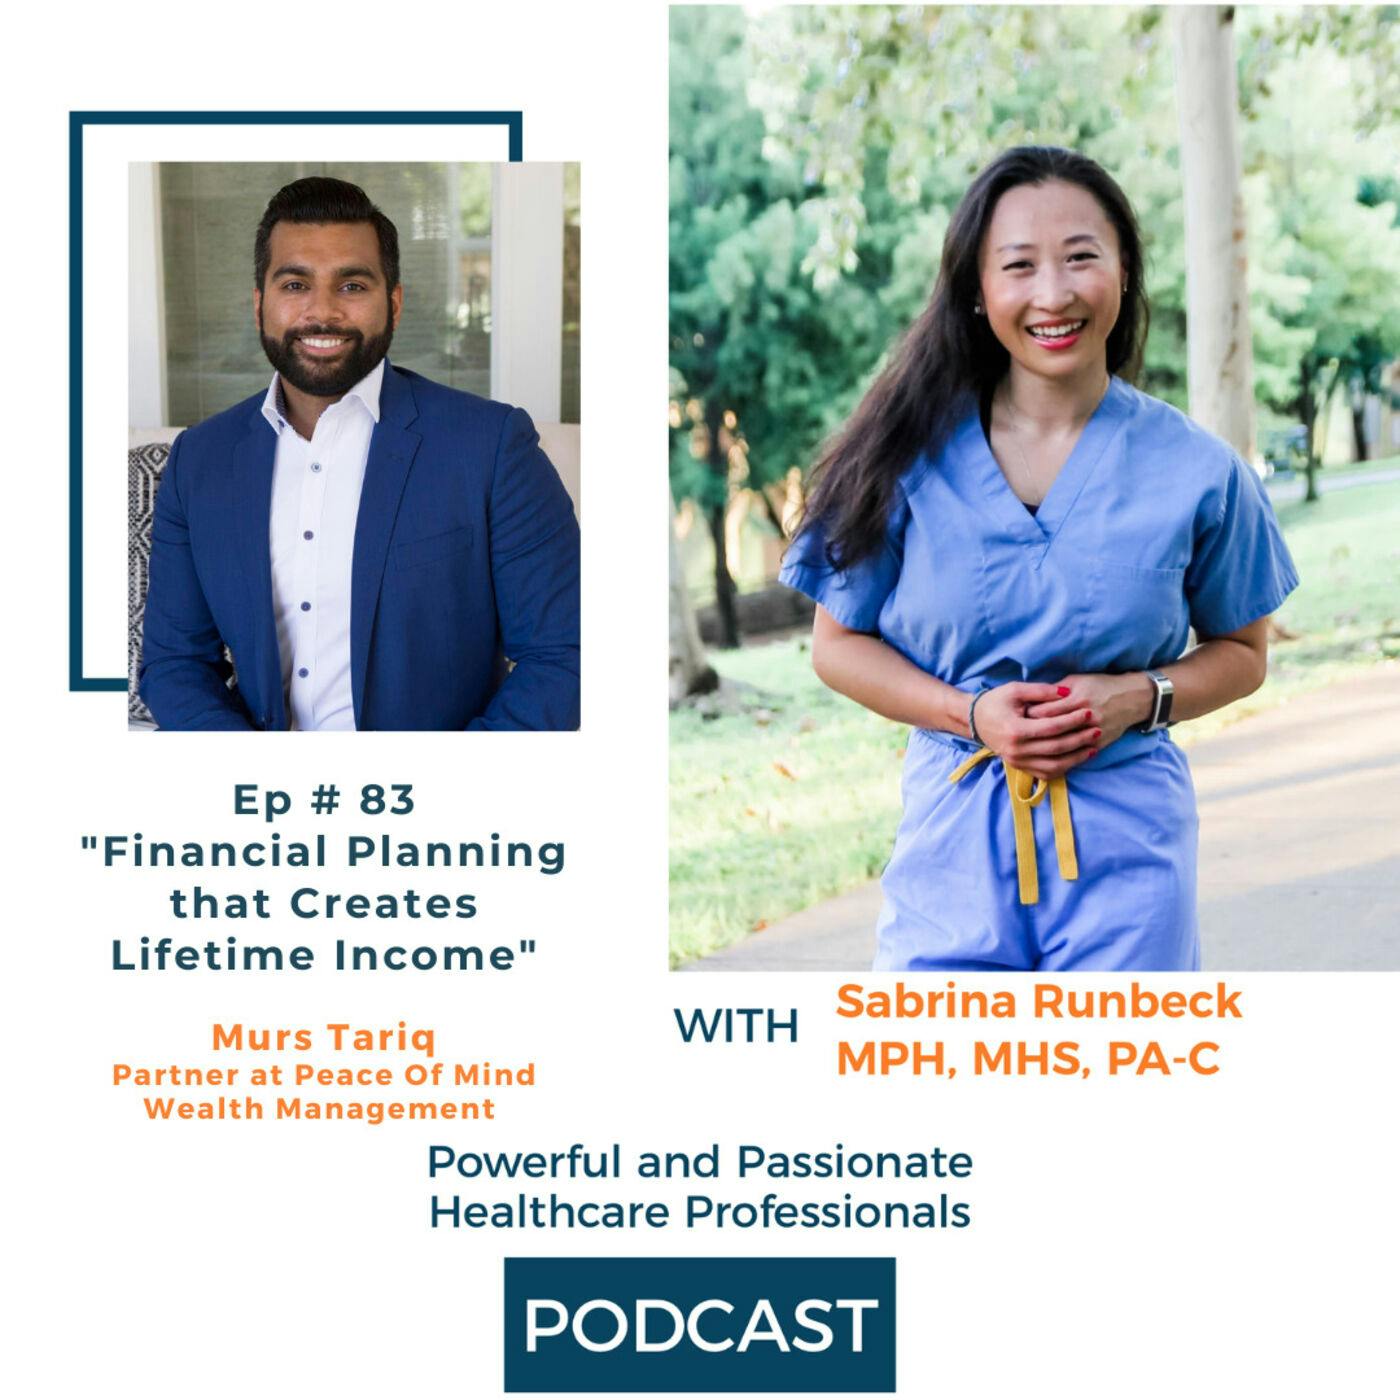 Ep 83 – Financial Planning that Creates Lifetime Income with Murs Tariq